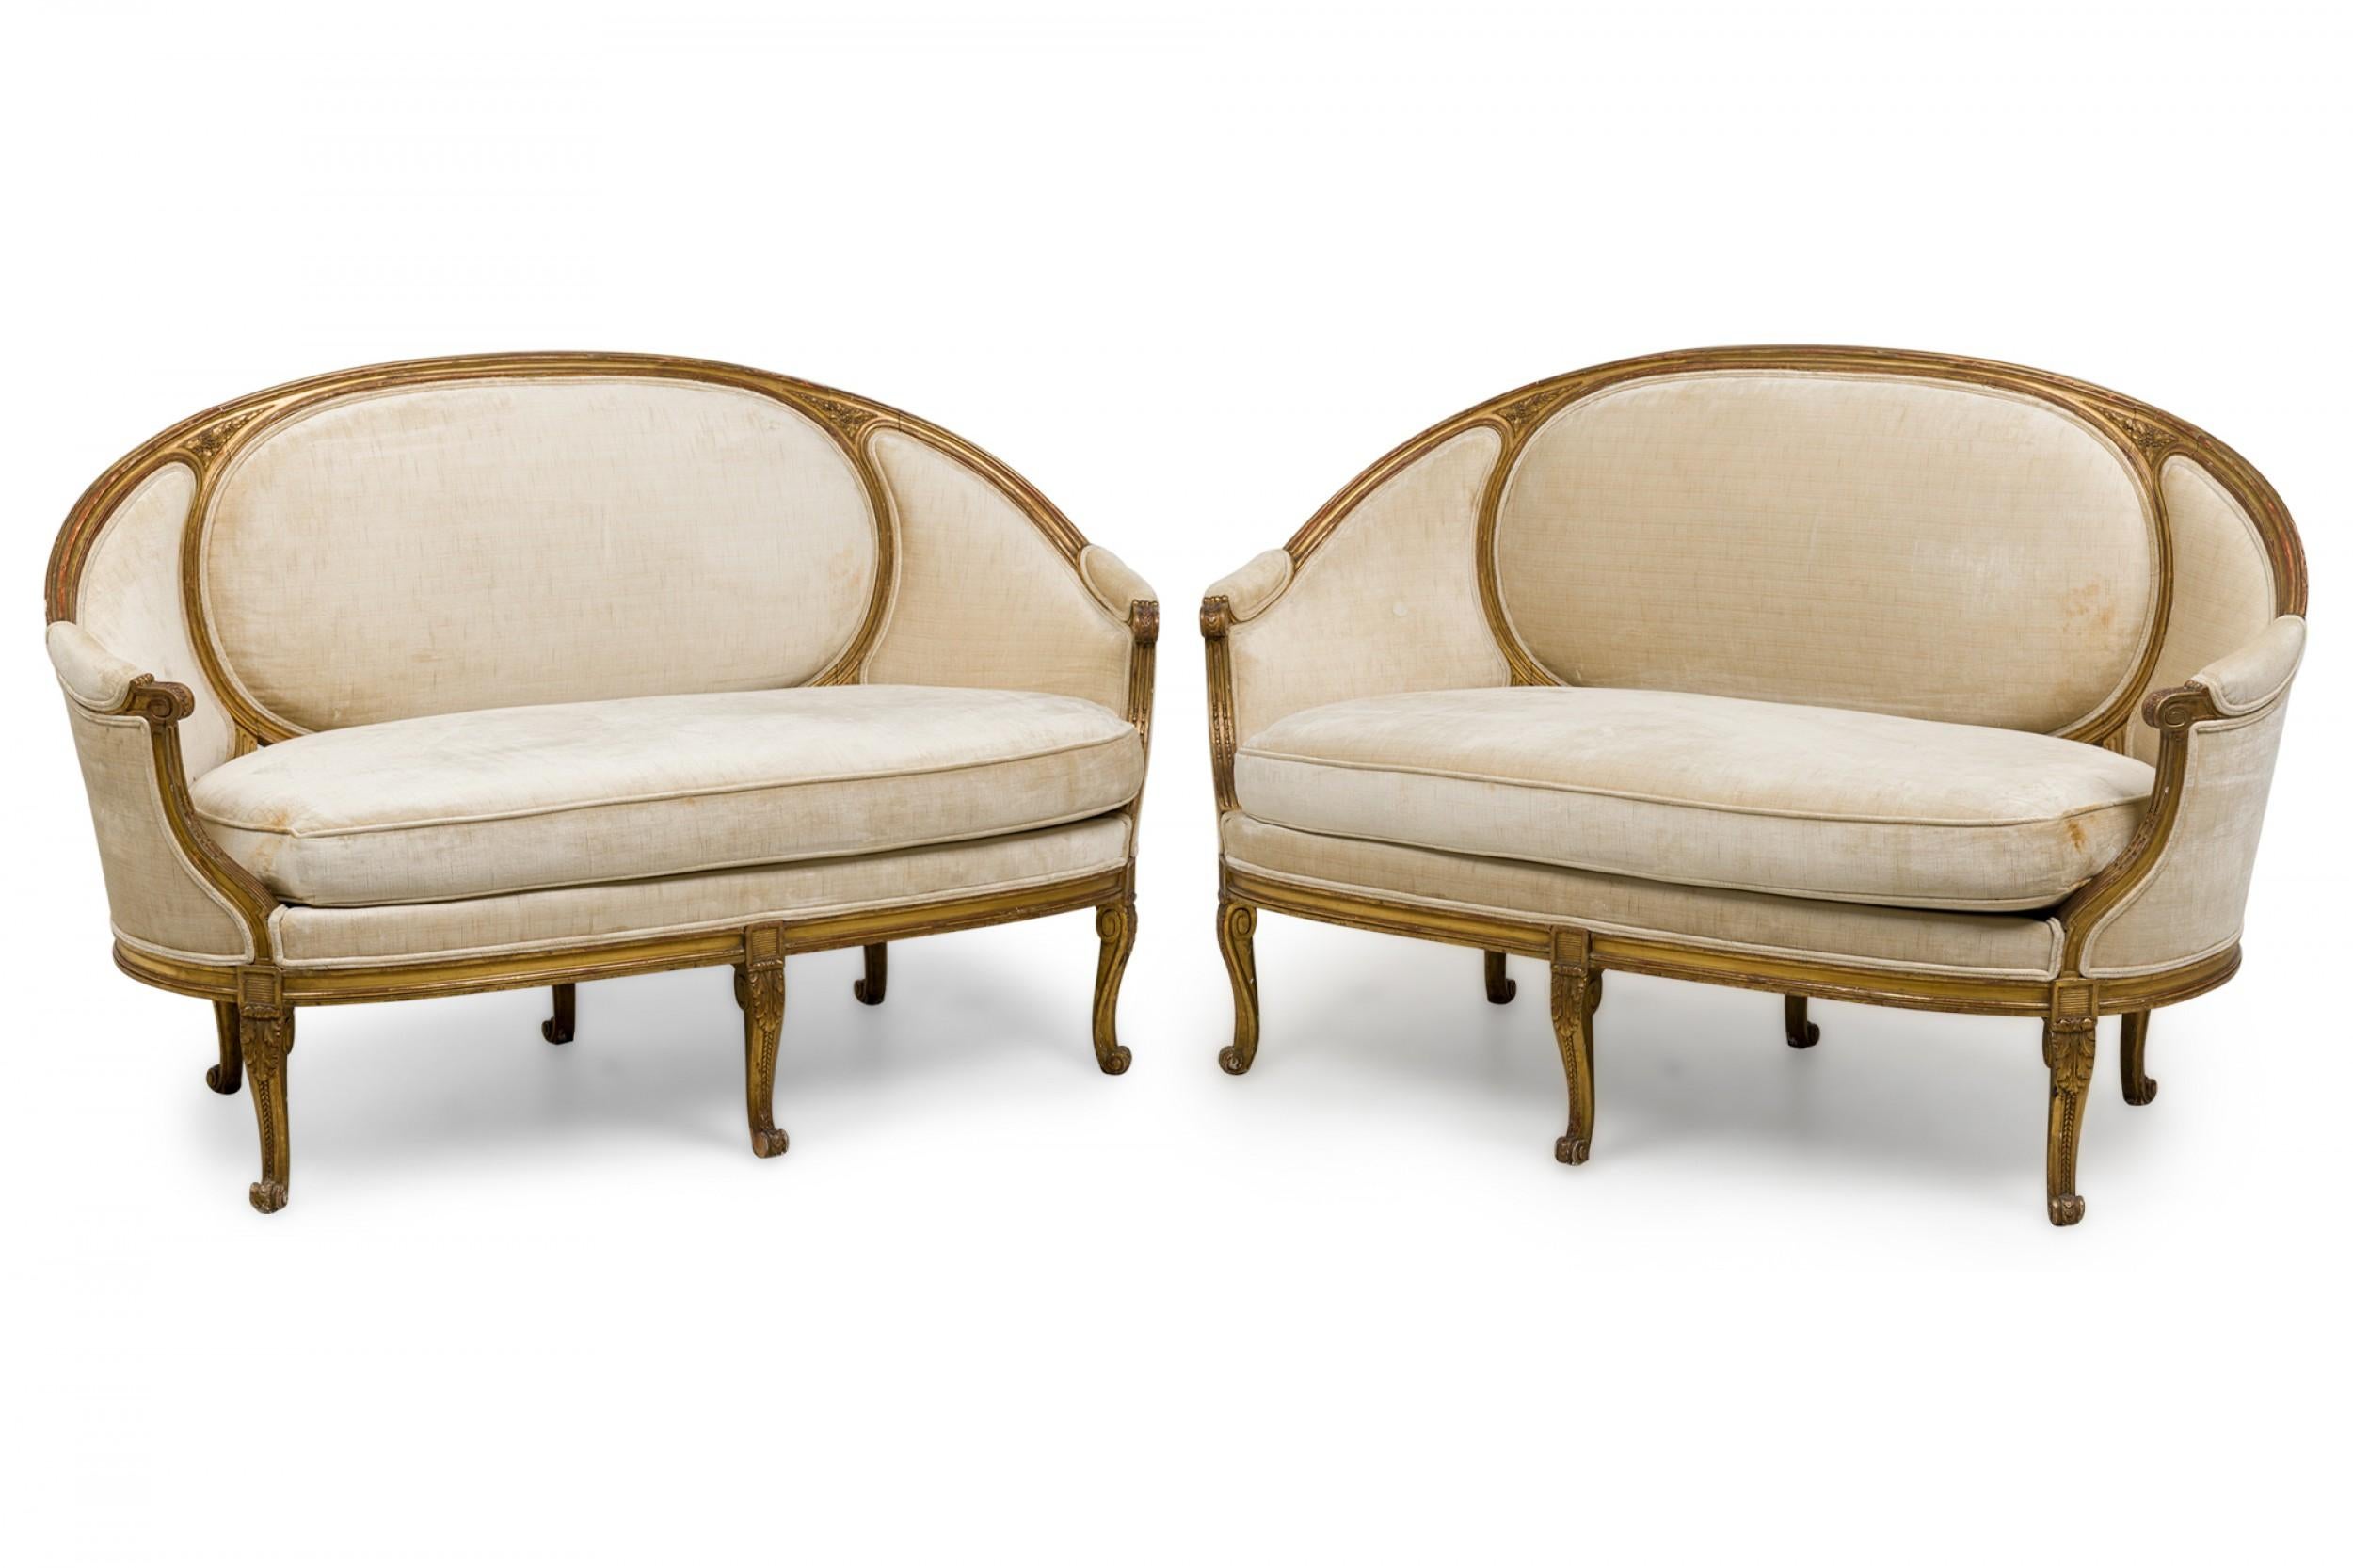 Pair of French Louis XVI (18th Century) canapes / settees with a curved and carved giltwood frame with a circular panel in the backrest, which curves forward to create the settee\'s arms, upholstered in a beige ribbed velvet, and resting on five